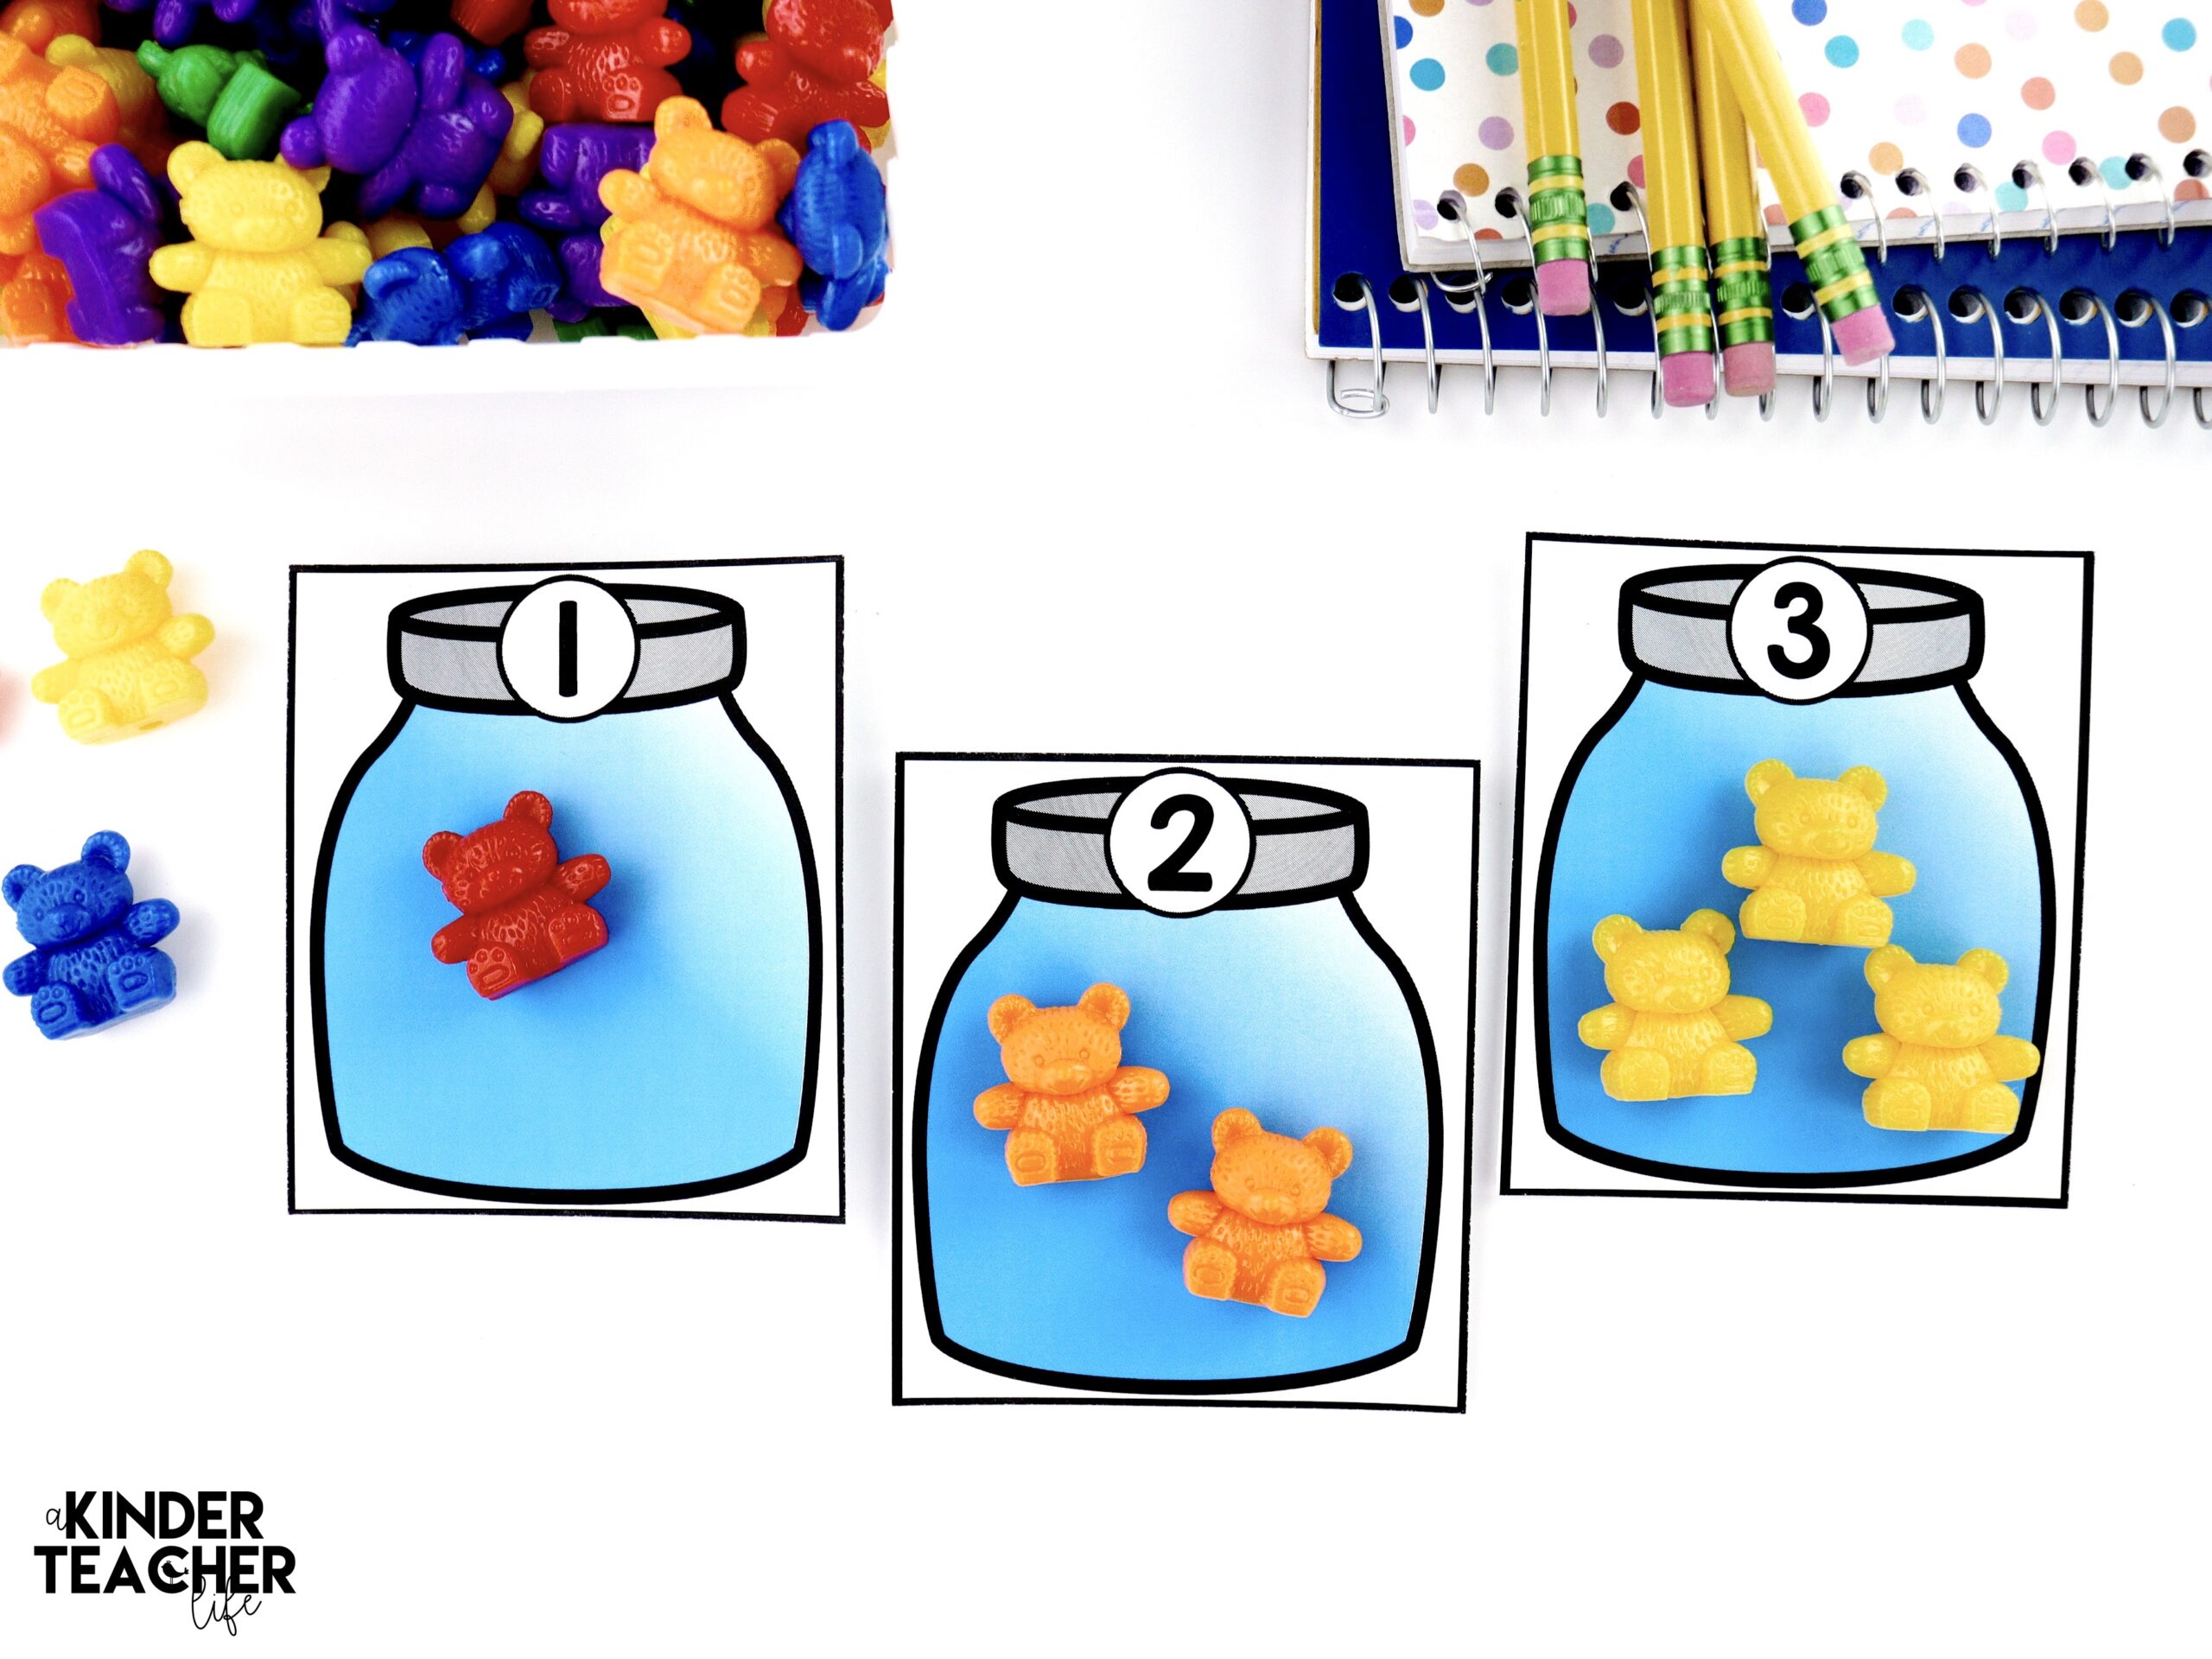 How to Teach Counting And Cardinality in Preschool